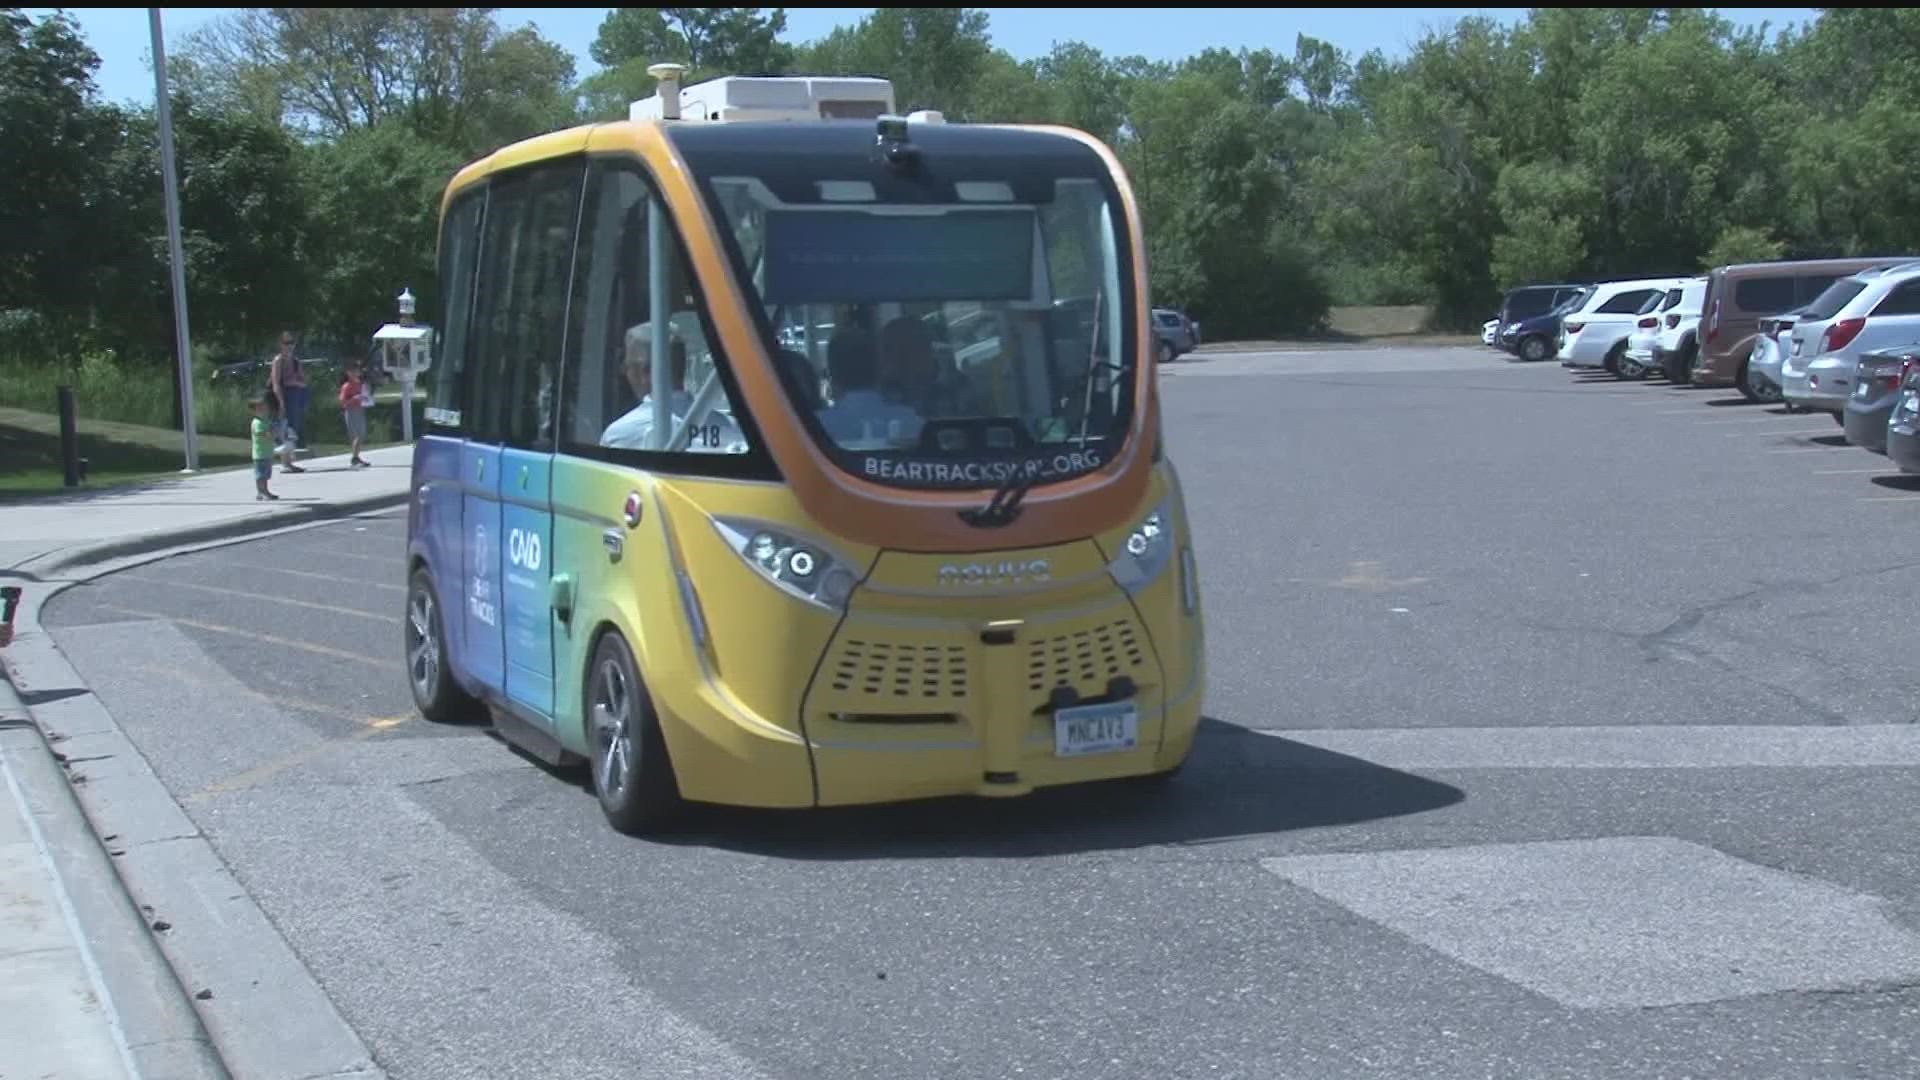 "Bear Tracks" is the Minnesota Department of Transportation's second of three automated vehicle demonstration projects.